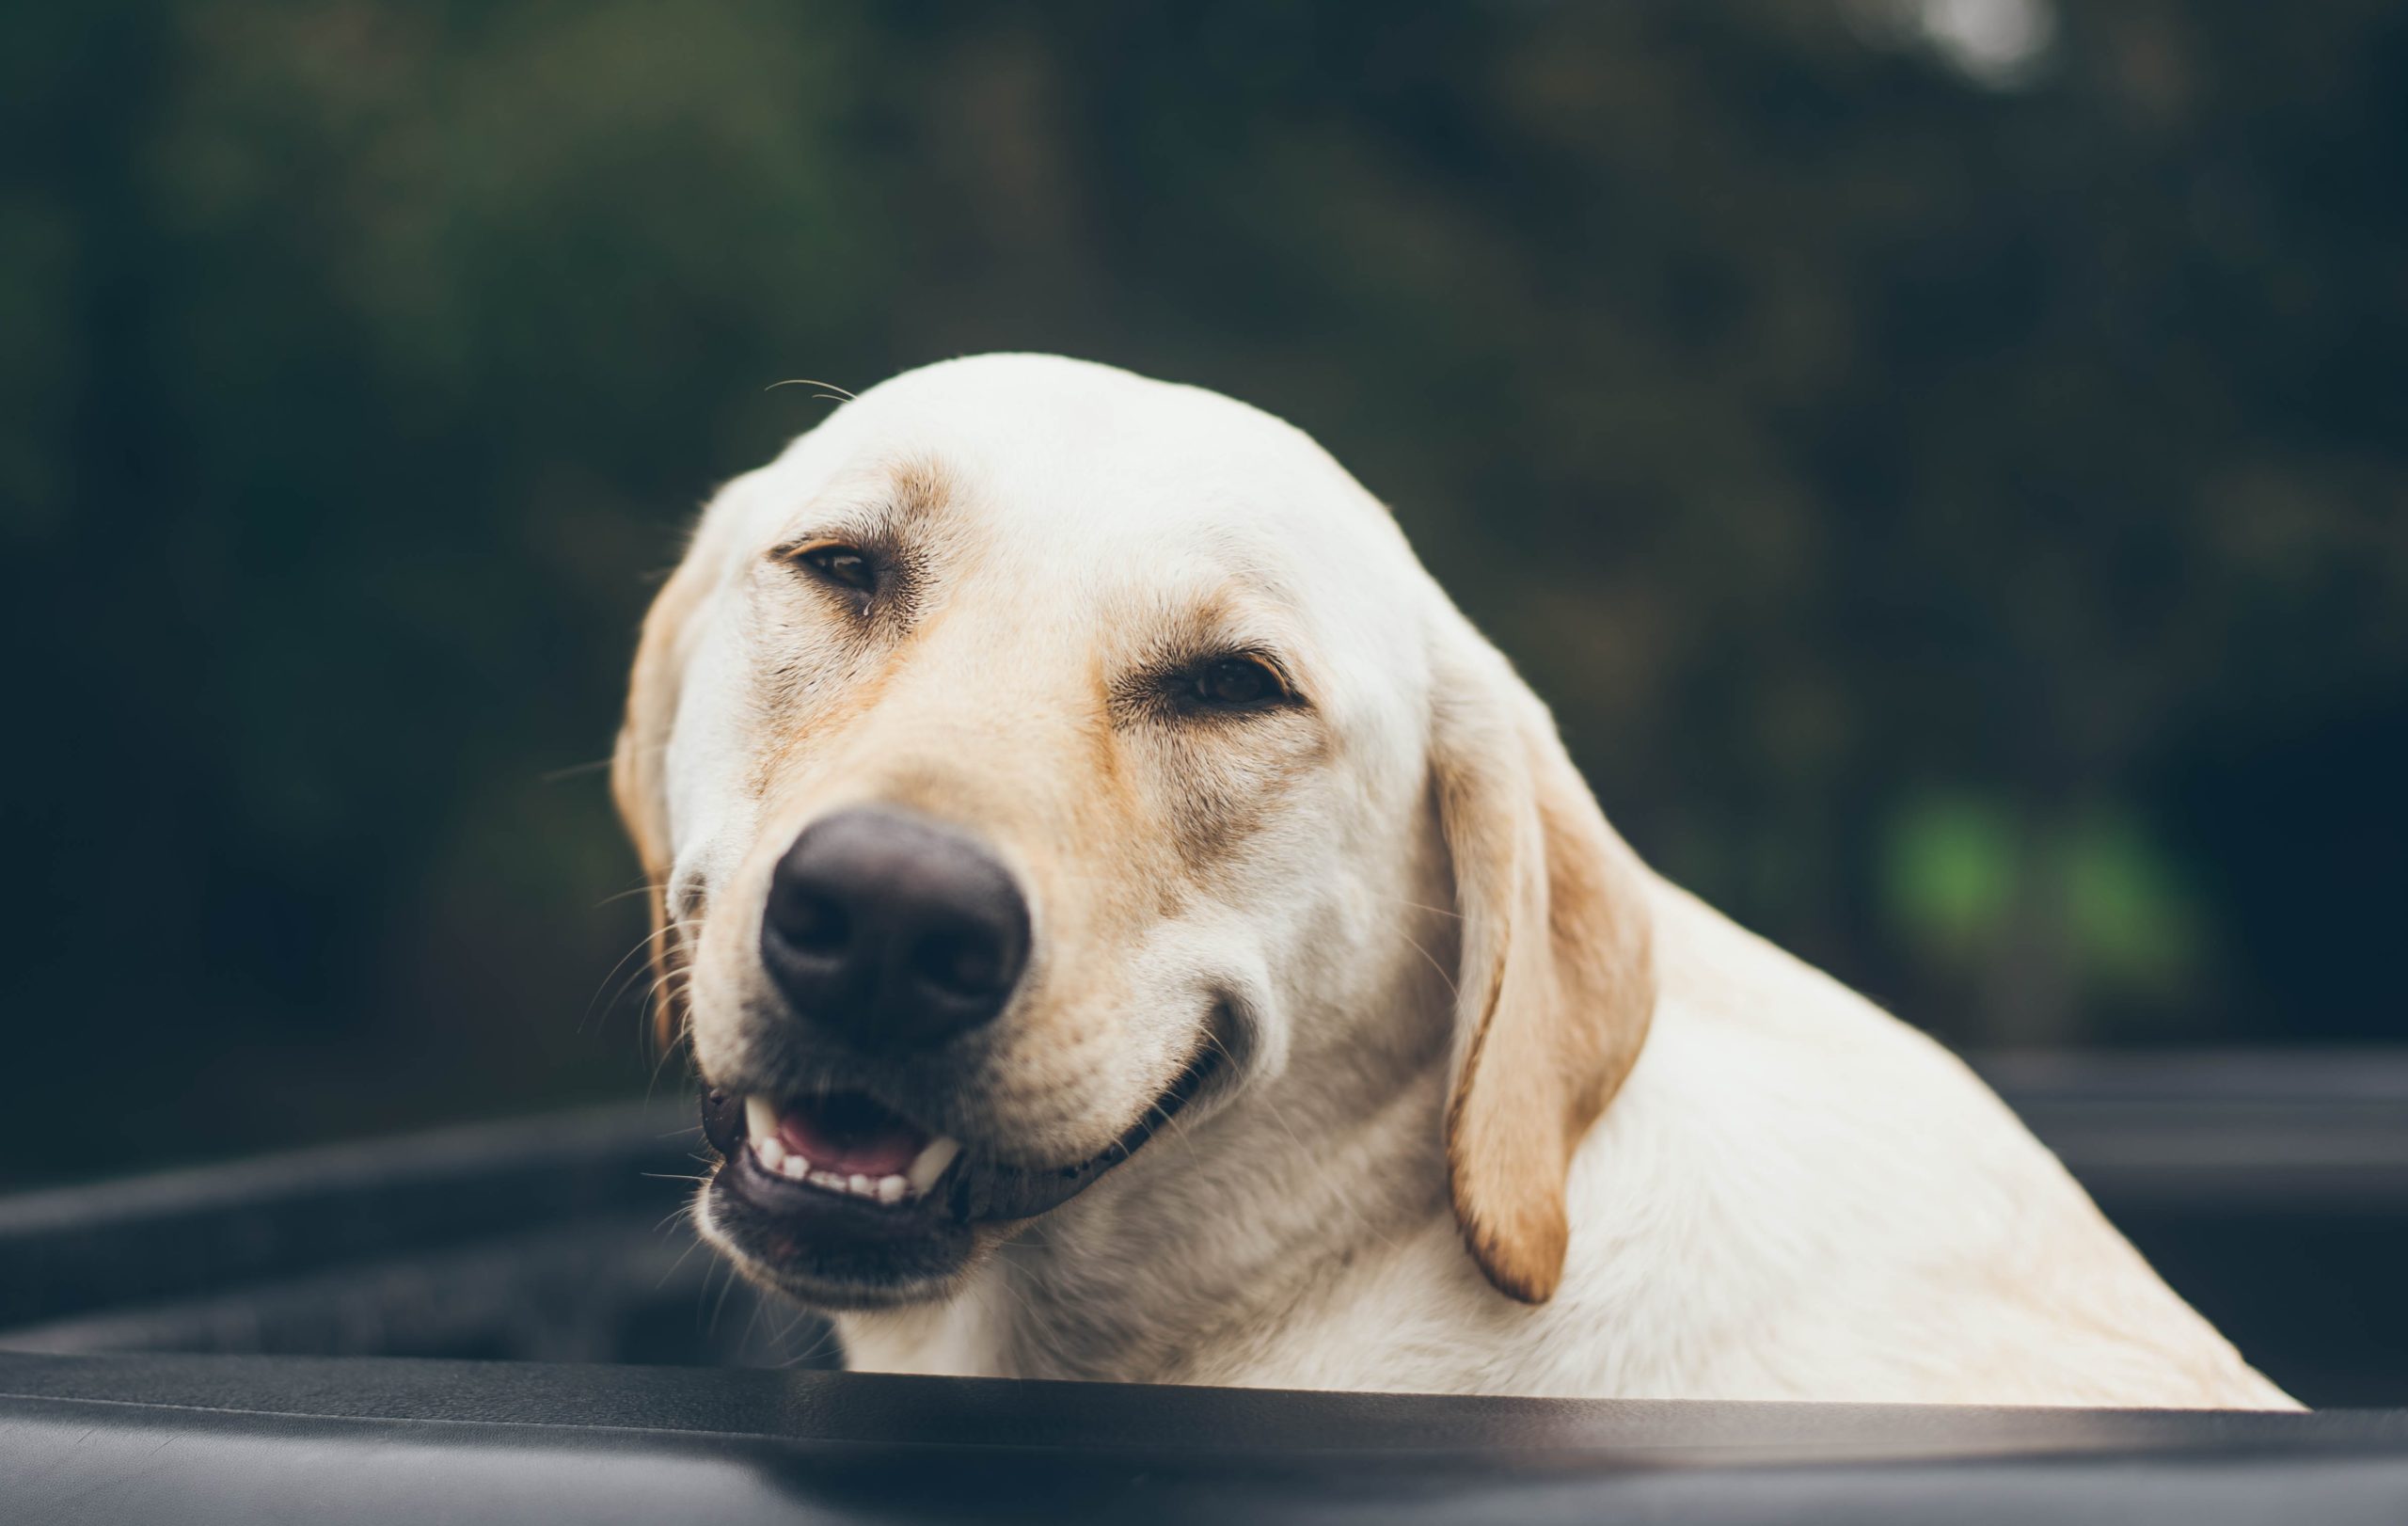 How to Get a Dog Unstoned: “Help, my dog is high!” (Q&A)